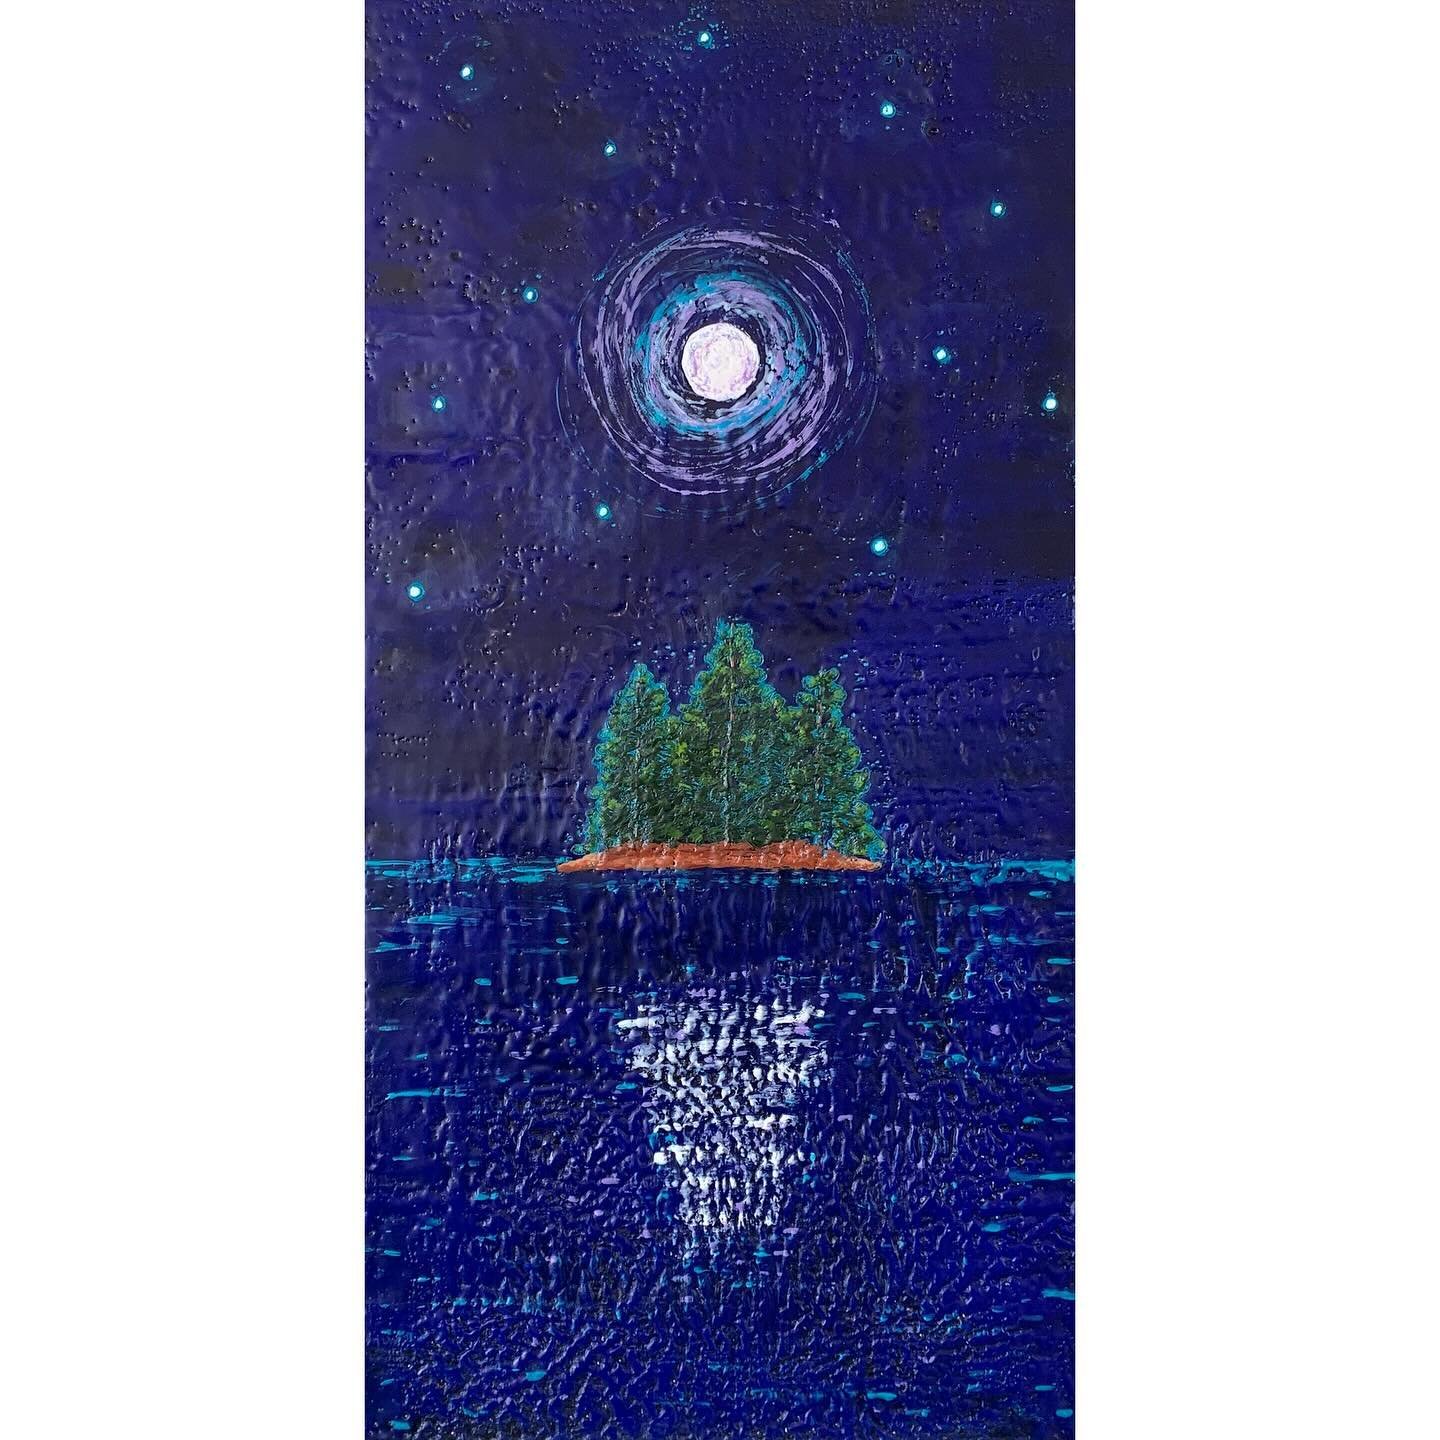 Another Maine moon island painting, this one with with lots of turquoise blue highlights. Each star has a ring of turquoise blue, and the island is silhouetted in blue, which you can see a little better in the closeup shot. Hence the title, Blue Nigh